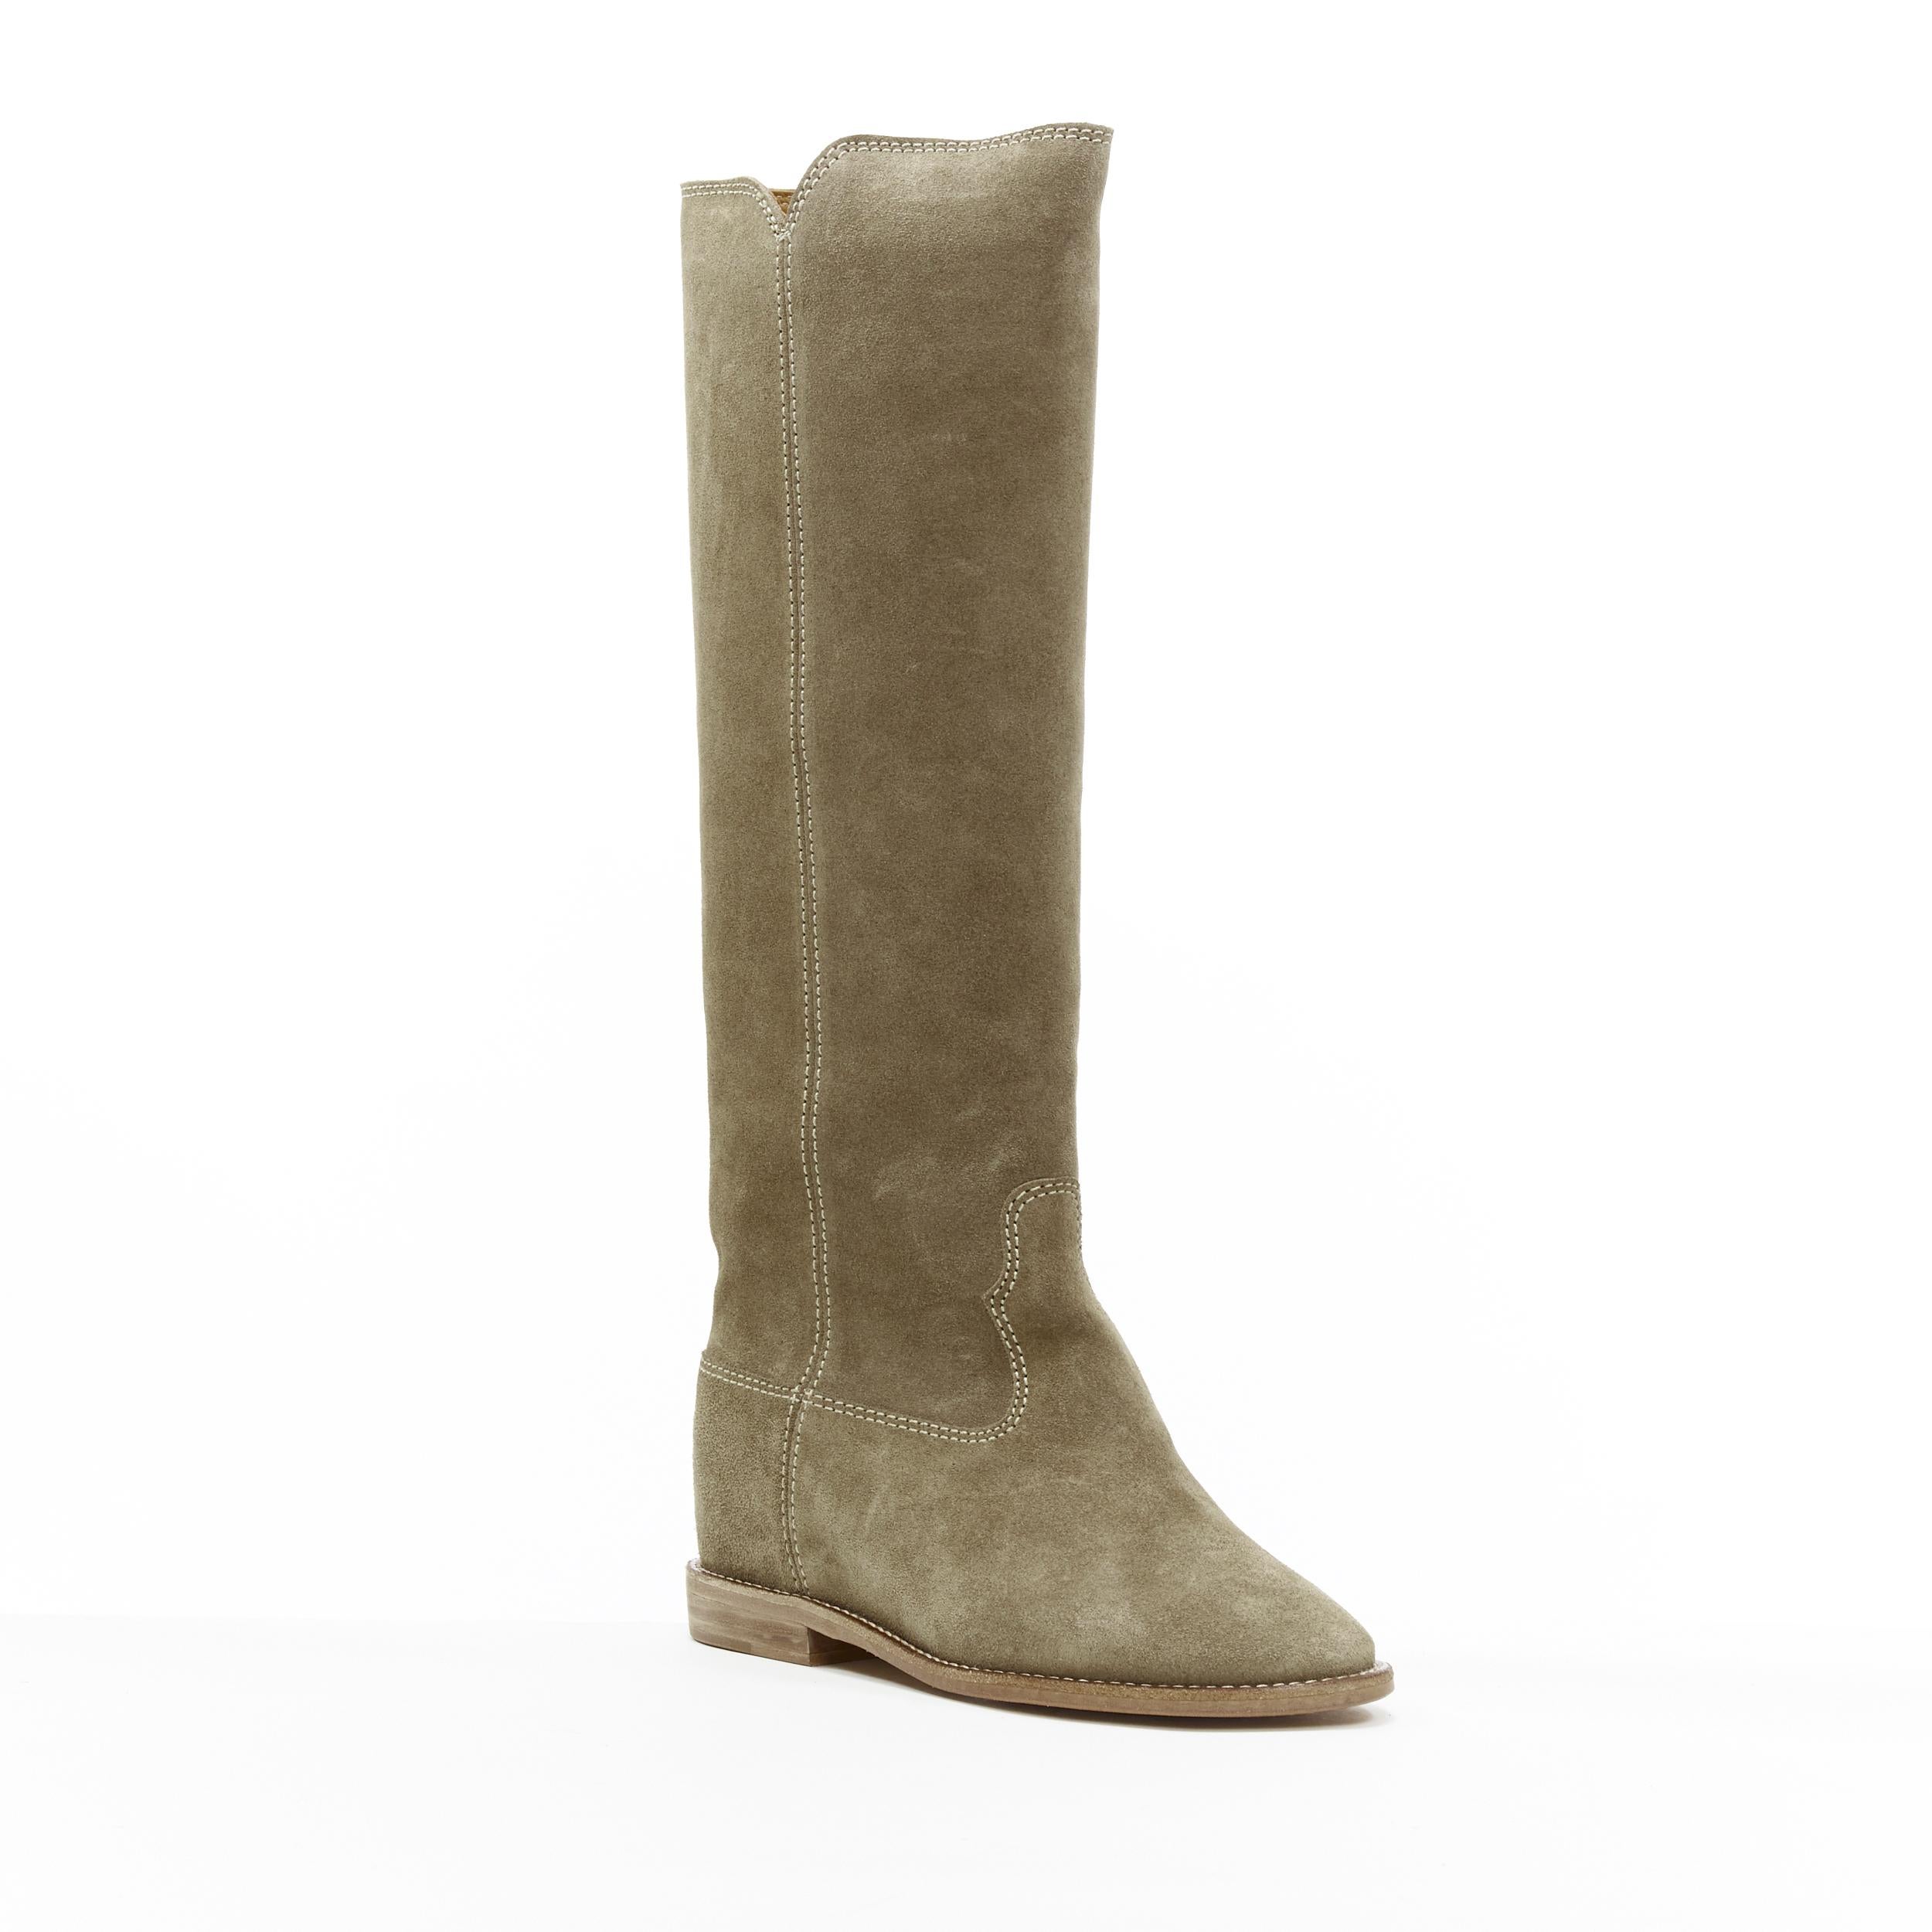 new ISABEL MARANT Cleave Taupe suede concealed wedge knee high western boot EU37
Brand: Isabel Marant Etoile
Designer: Isabel Marant
Model Name / Style: Cleave
Material: Suede
Color: Beige; Taupe Olive
Pattern: Solid
Closure: Pull on
Lining